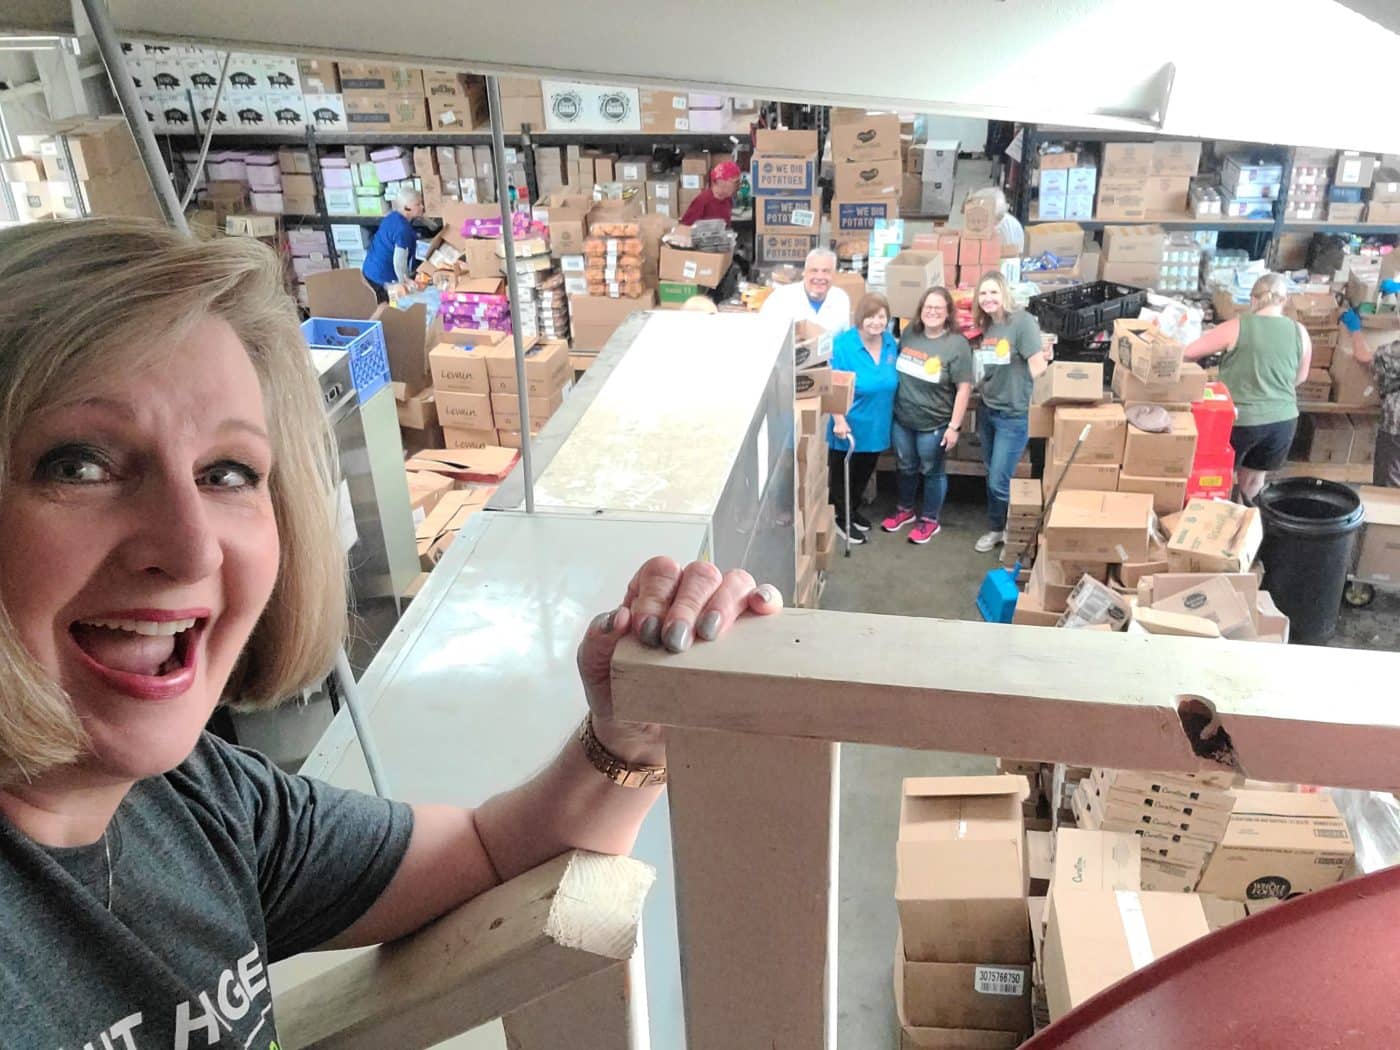 Group of people in warehouse with boxes